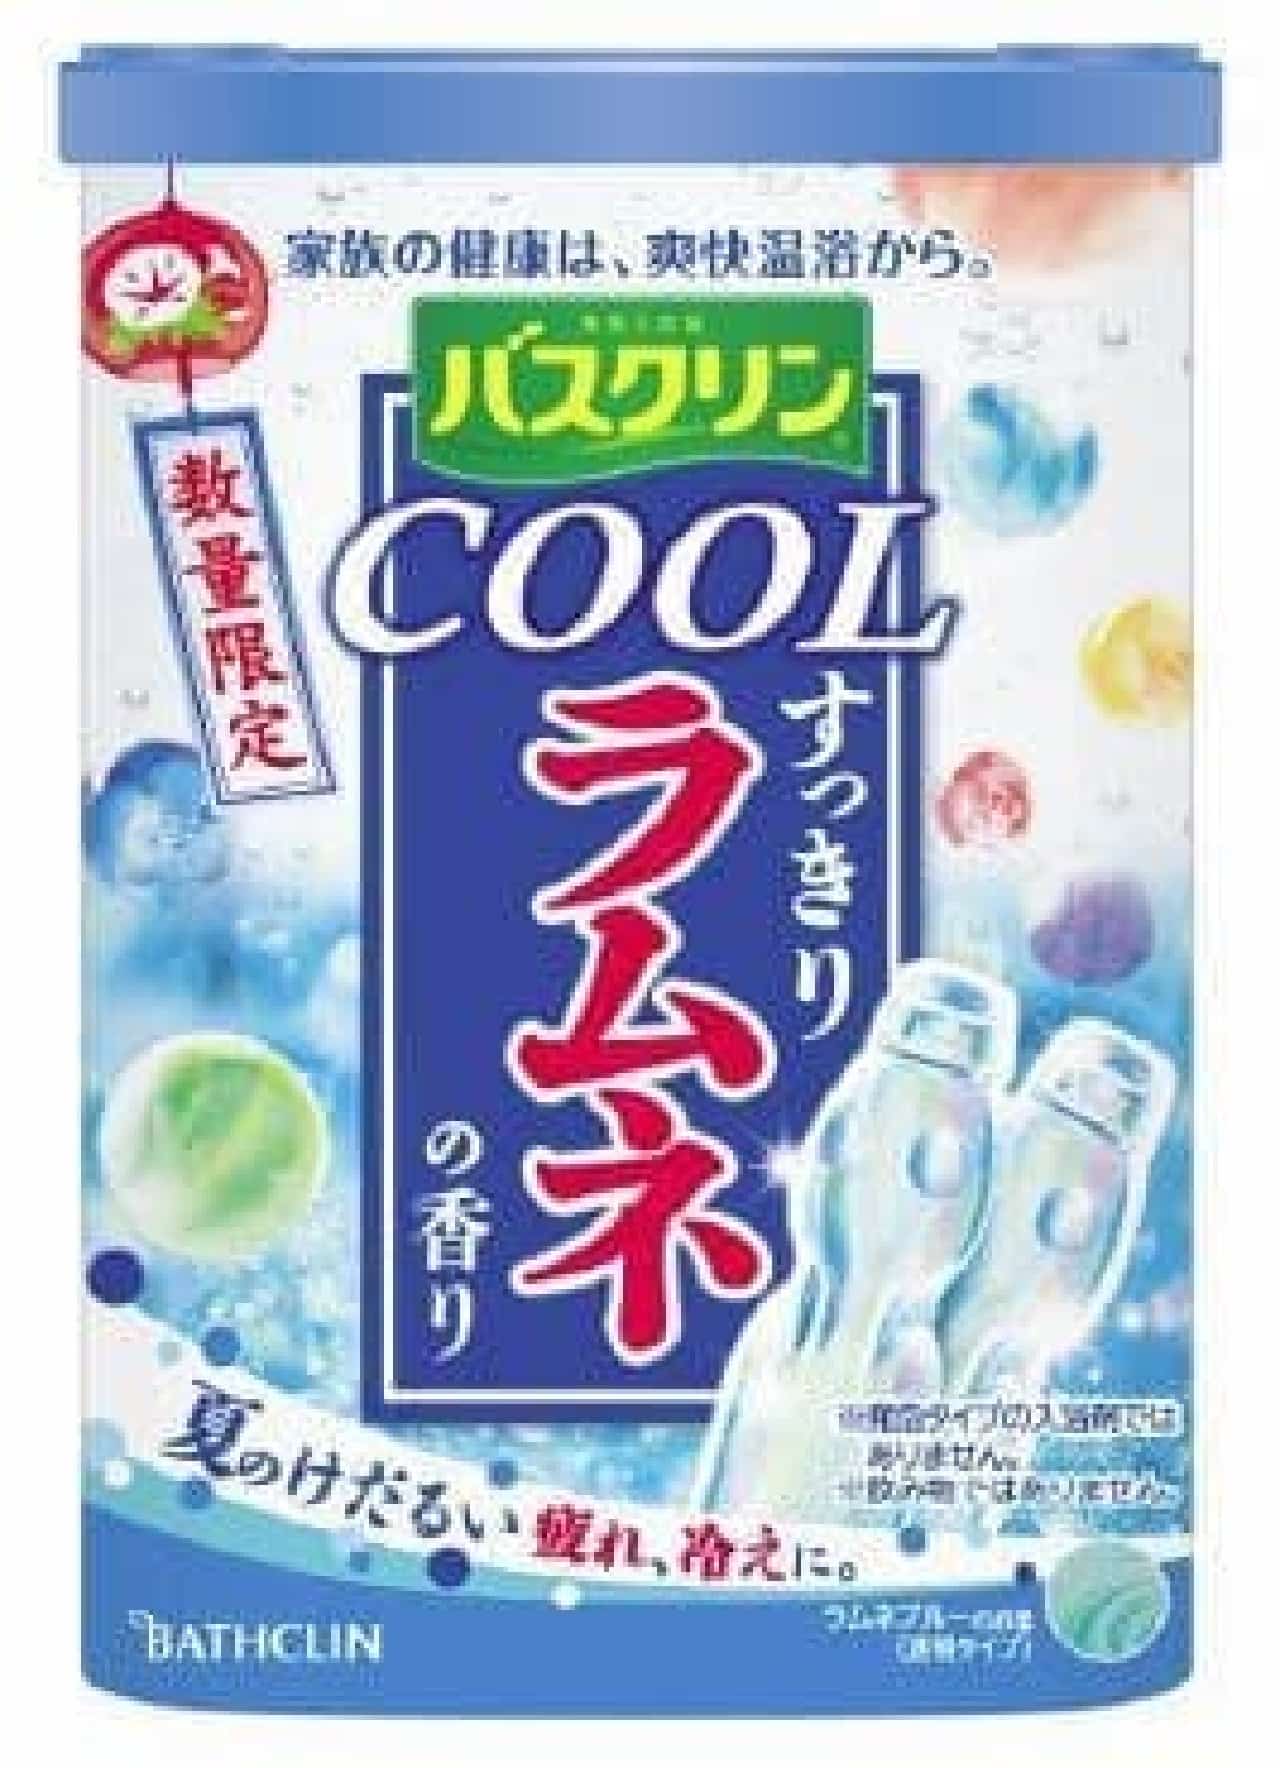 A refreshing scent of ramune! But I can't drink!